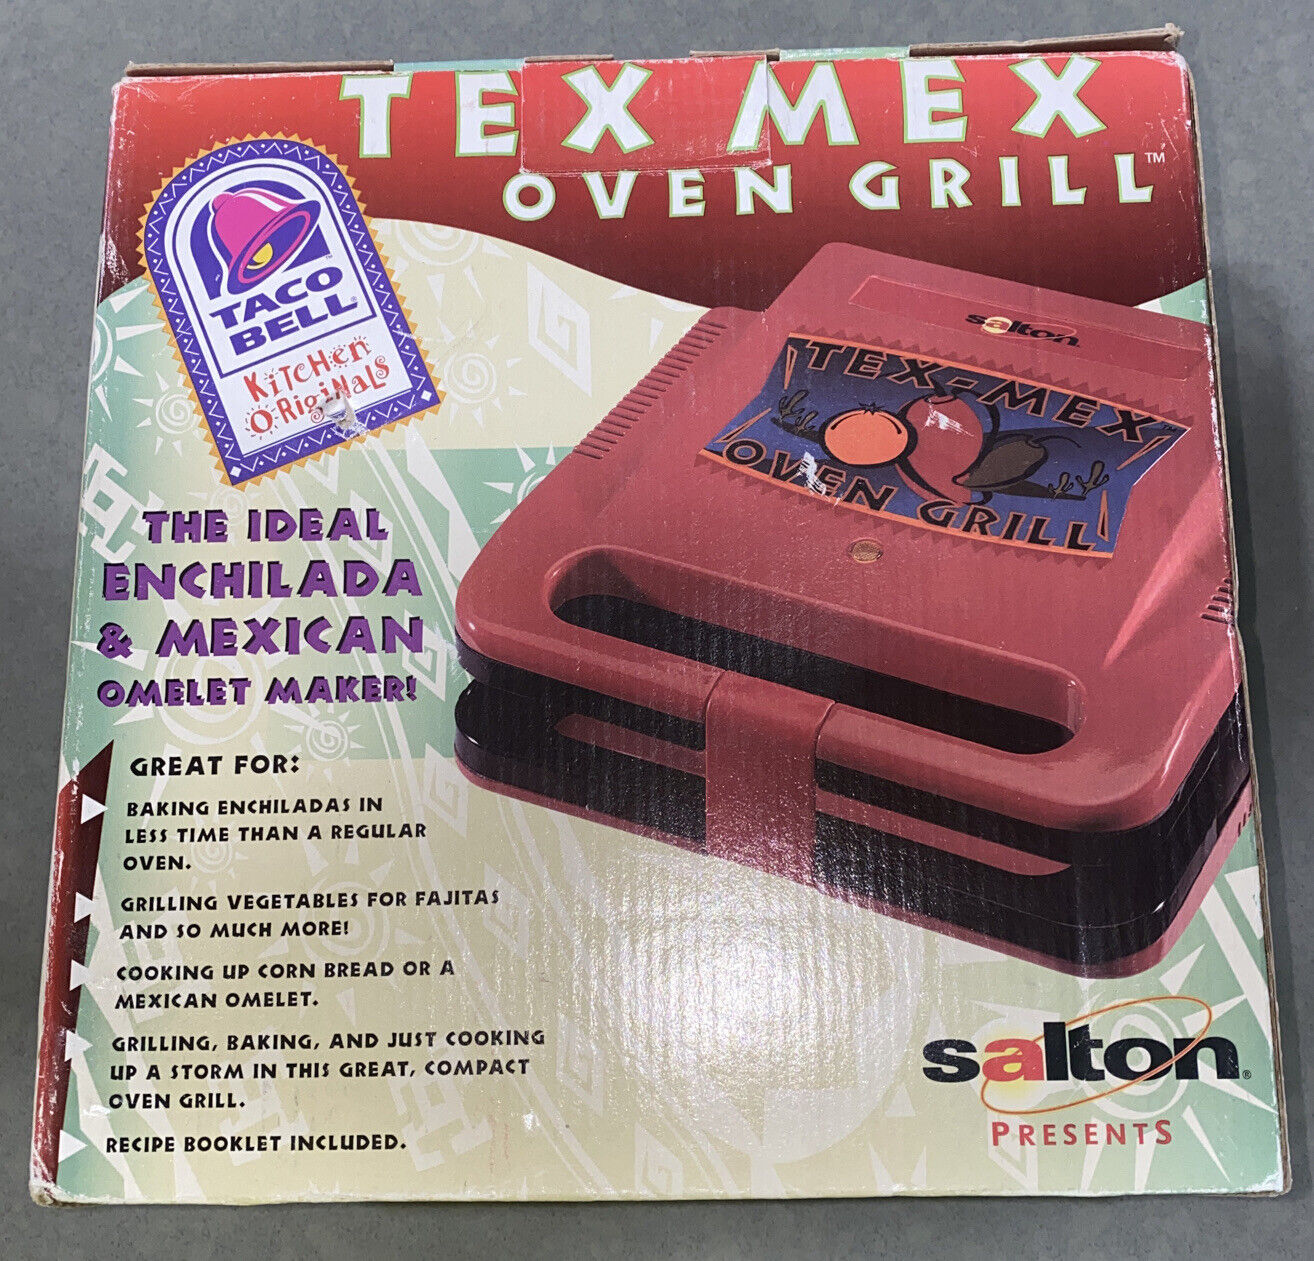 Vintage Red Taco Bell Salton Tex Mex Oven Grill Enchilada Mexican Omelet Maker